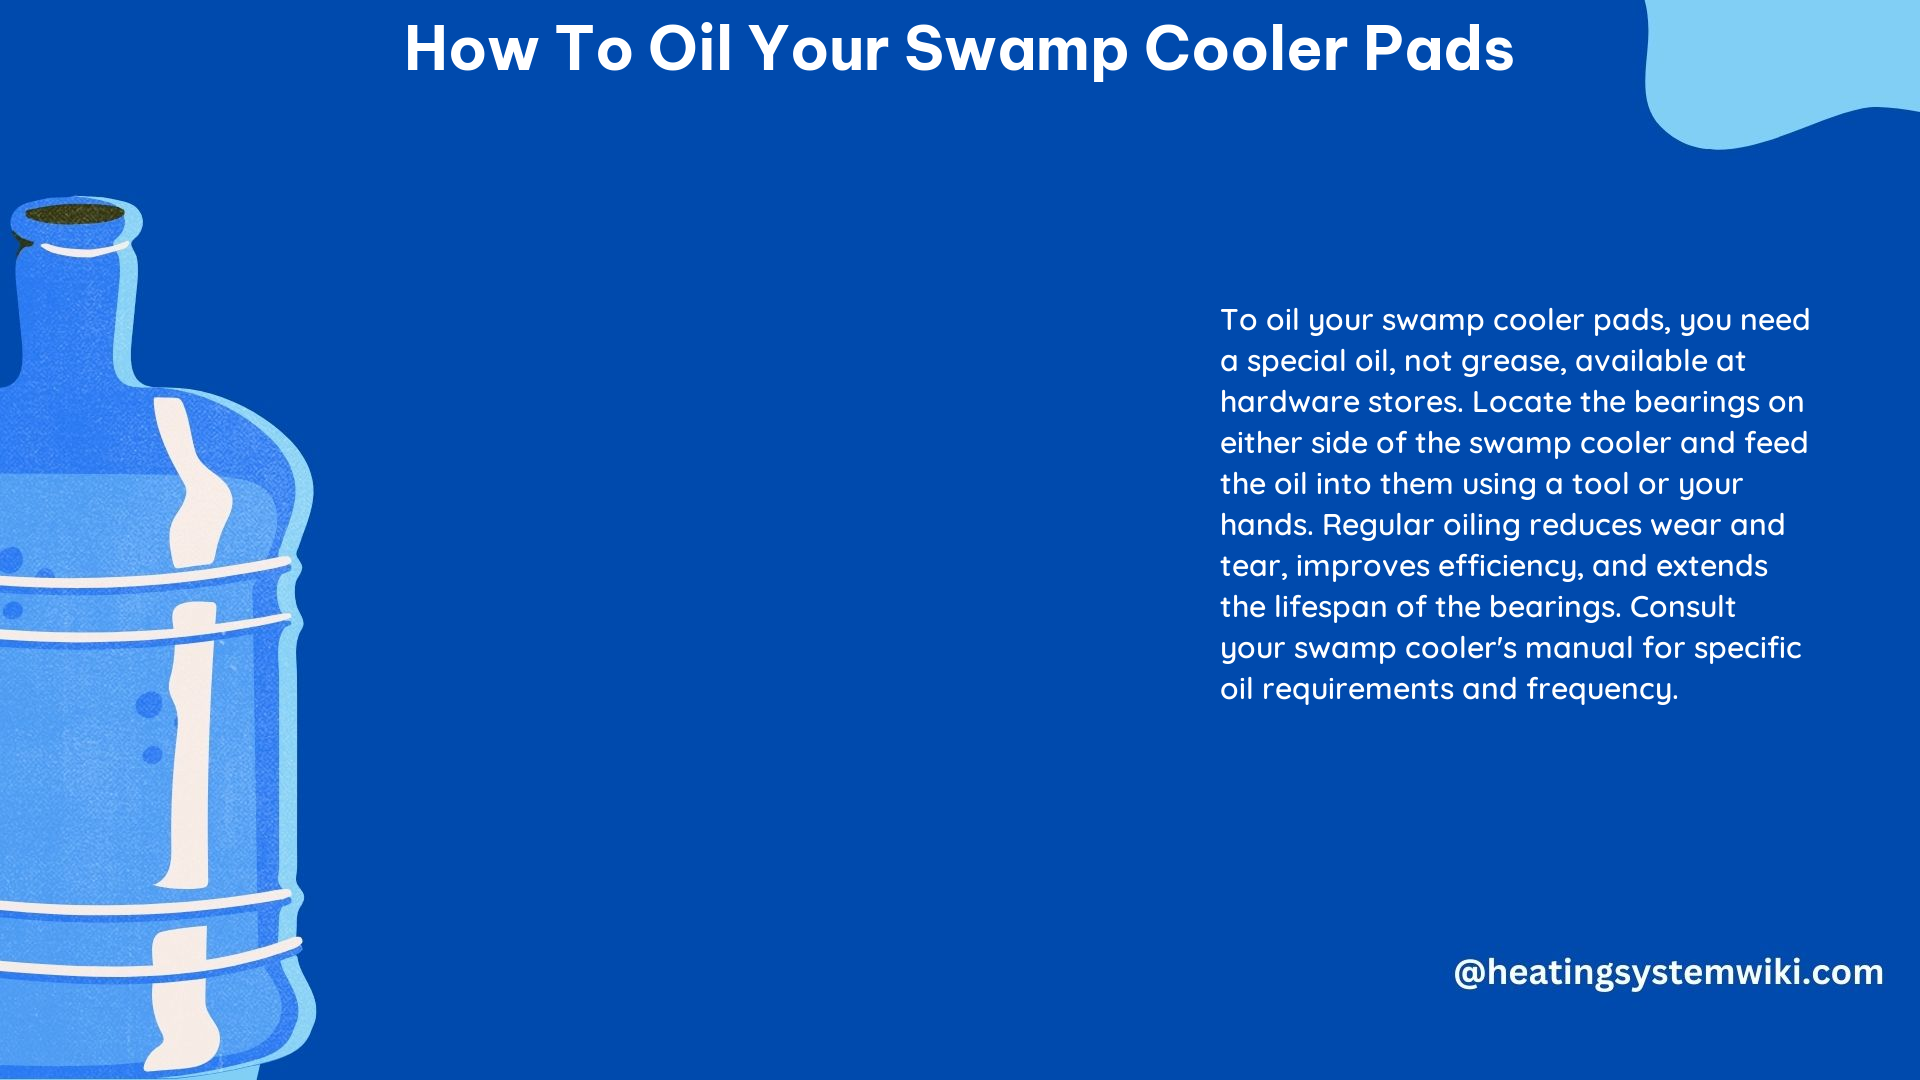 How to Oil Your Swamp Cooler Pads